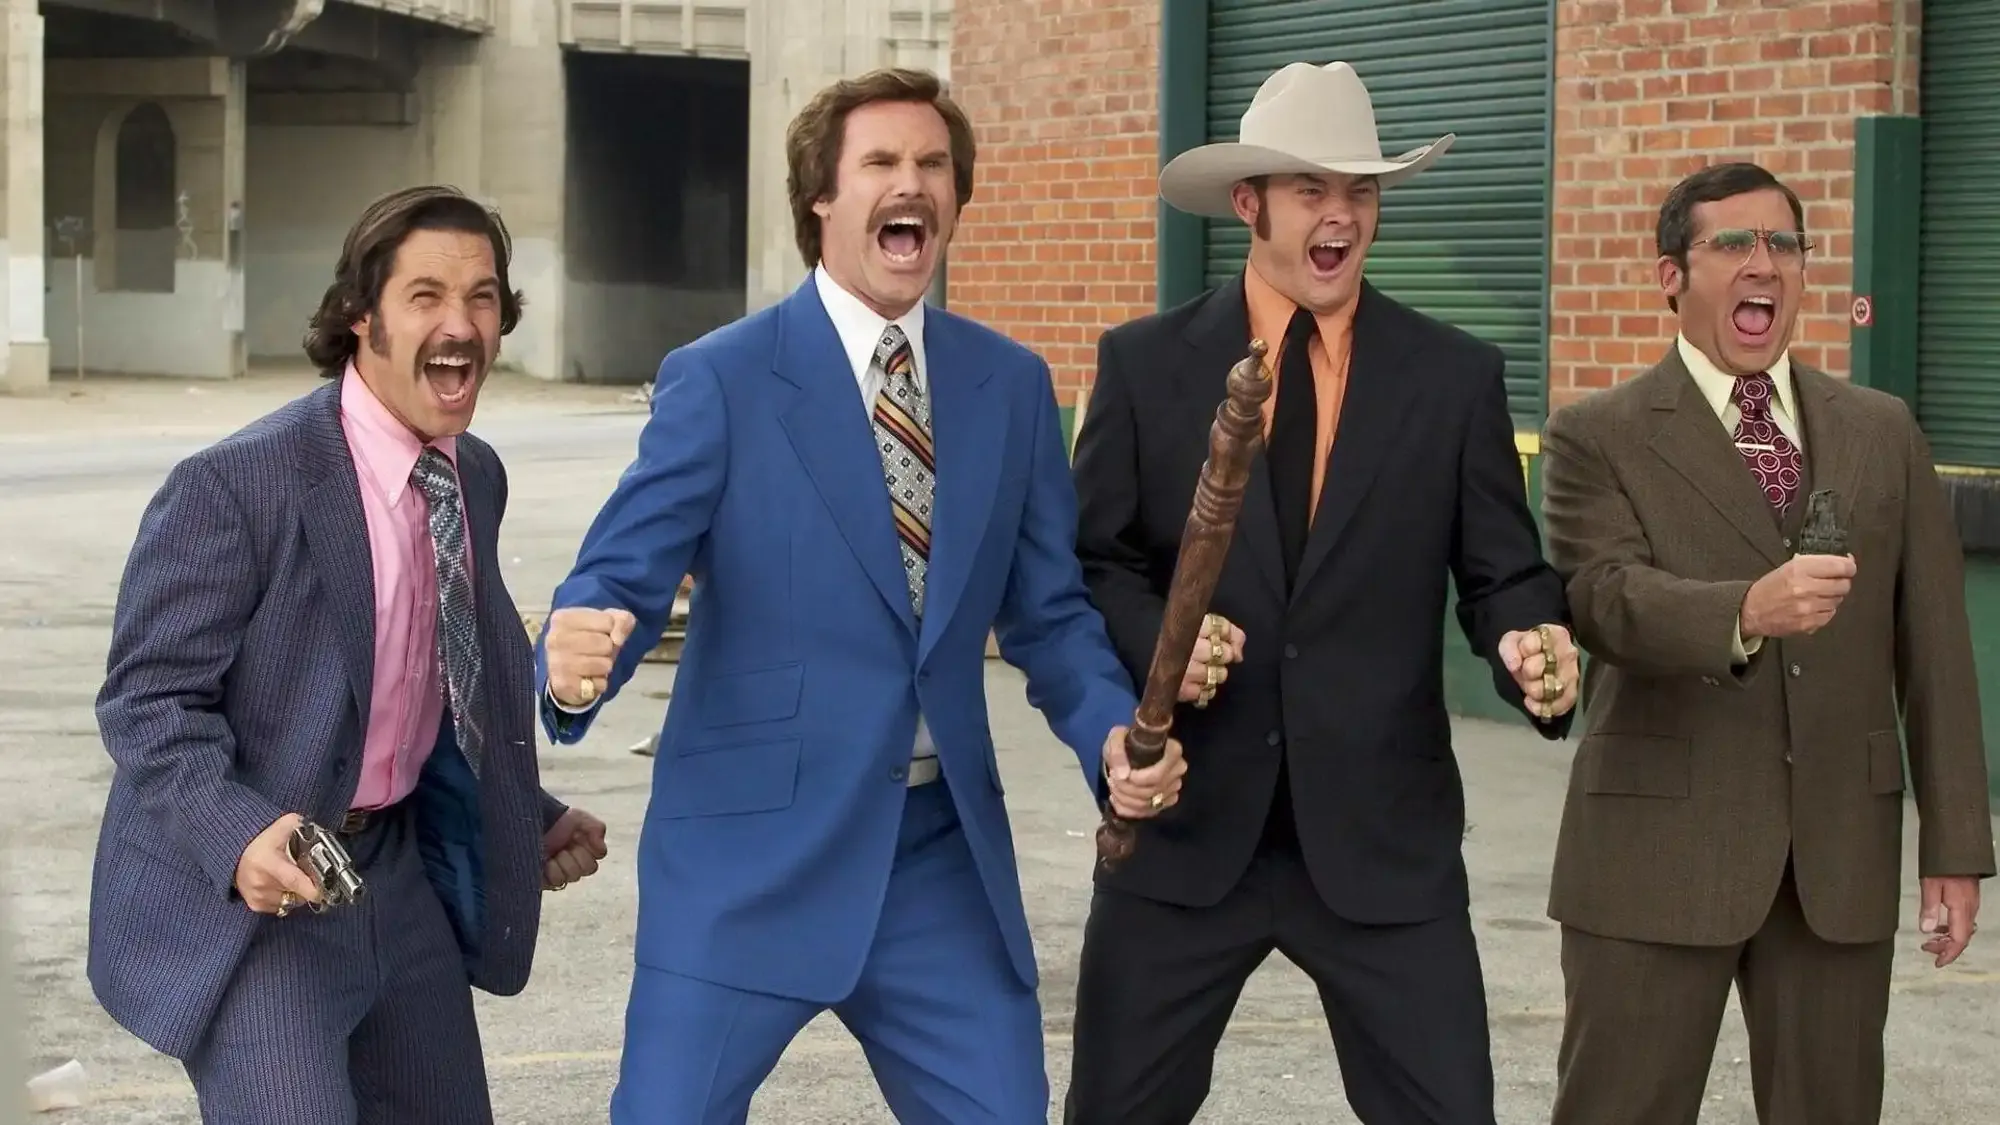 Anchorman: The Legend of Ron Burgundy movie review